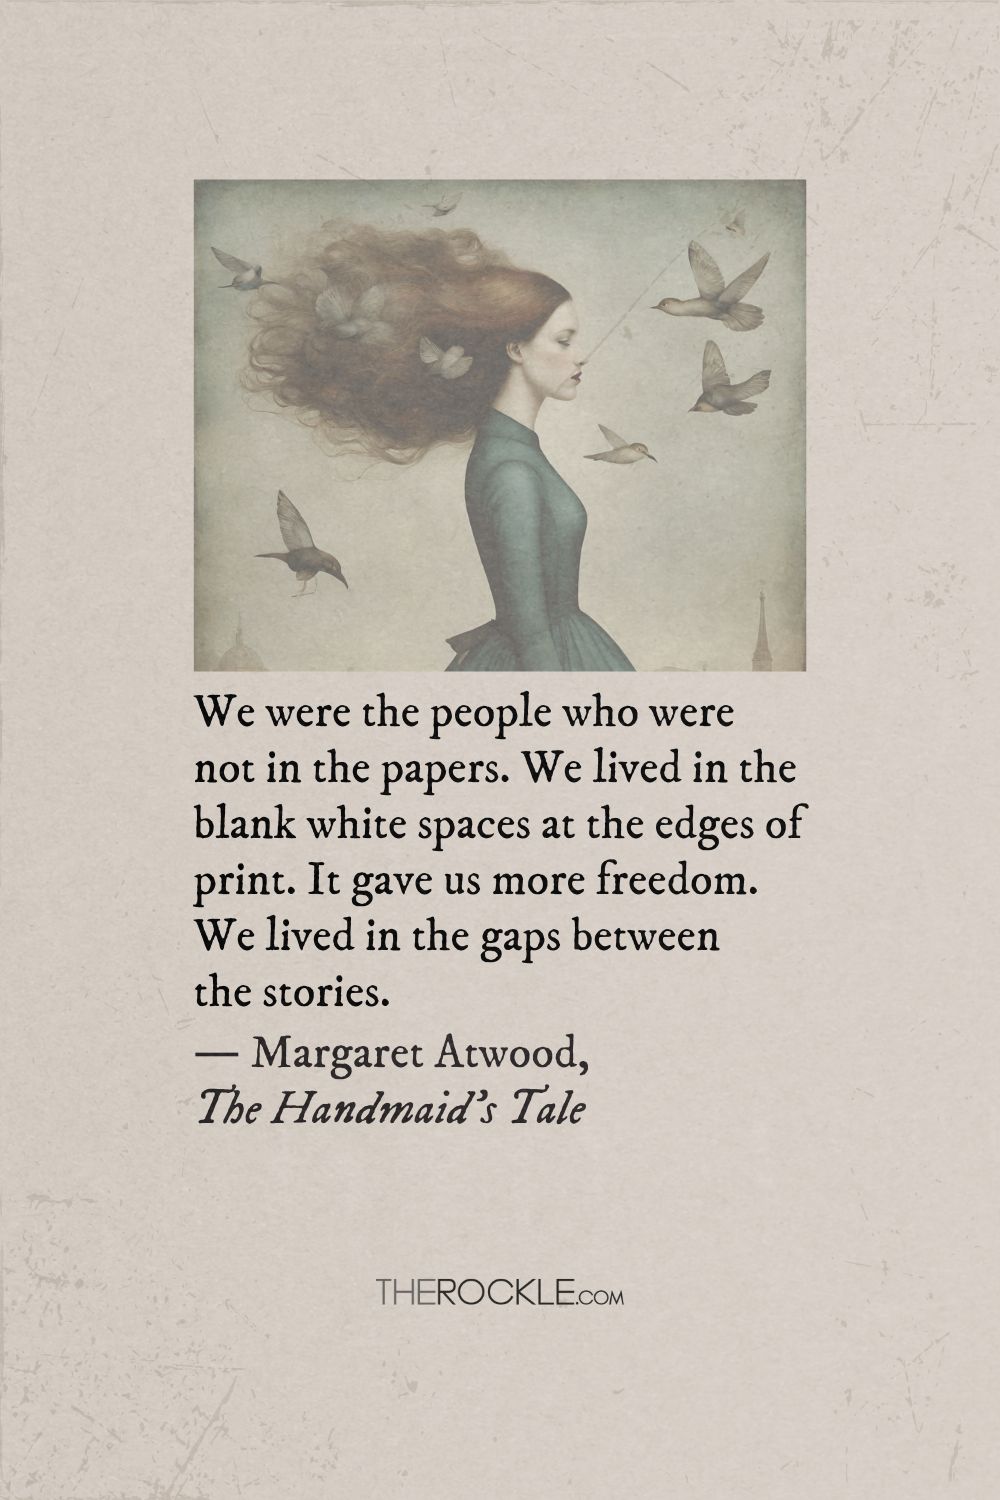 Margaret Atwood's quote on freedom in obscurity